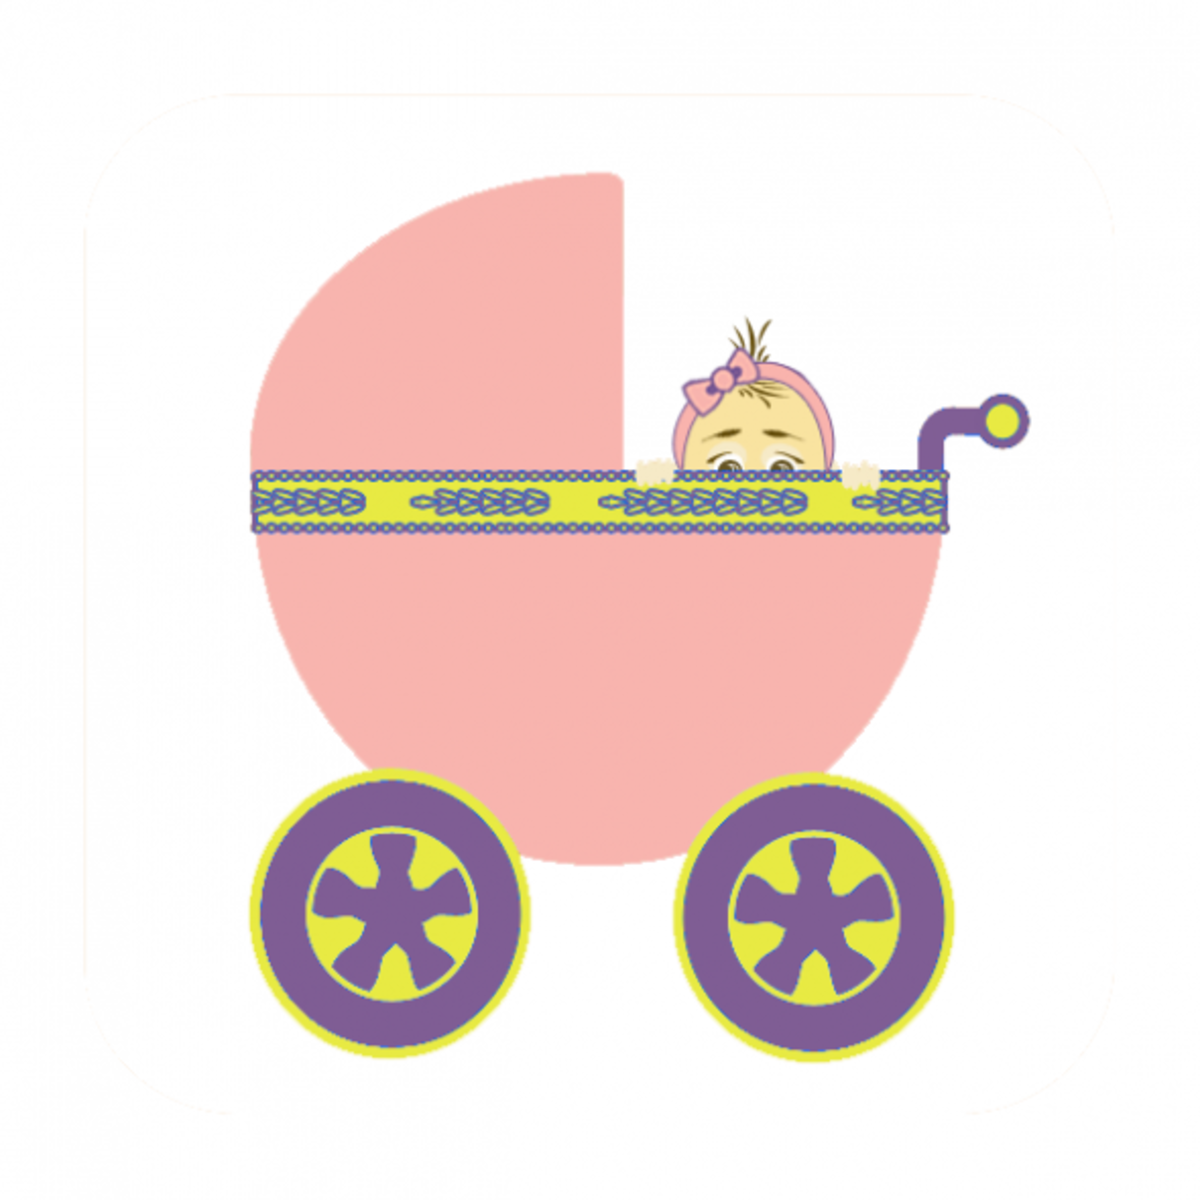 Image of a baby girl peaking out of a pink carriage.